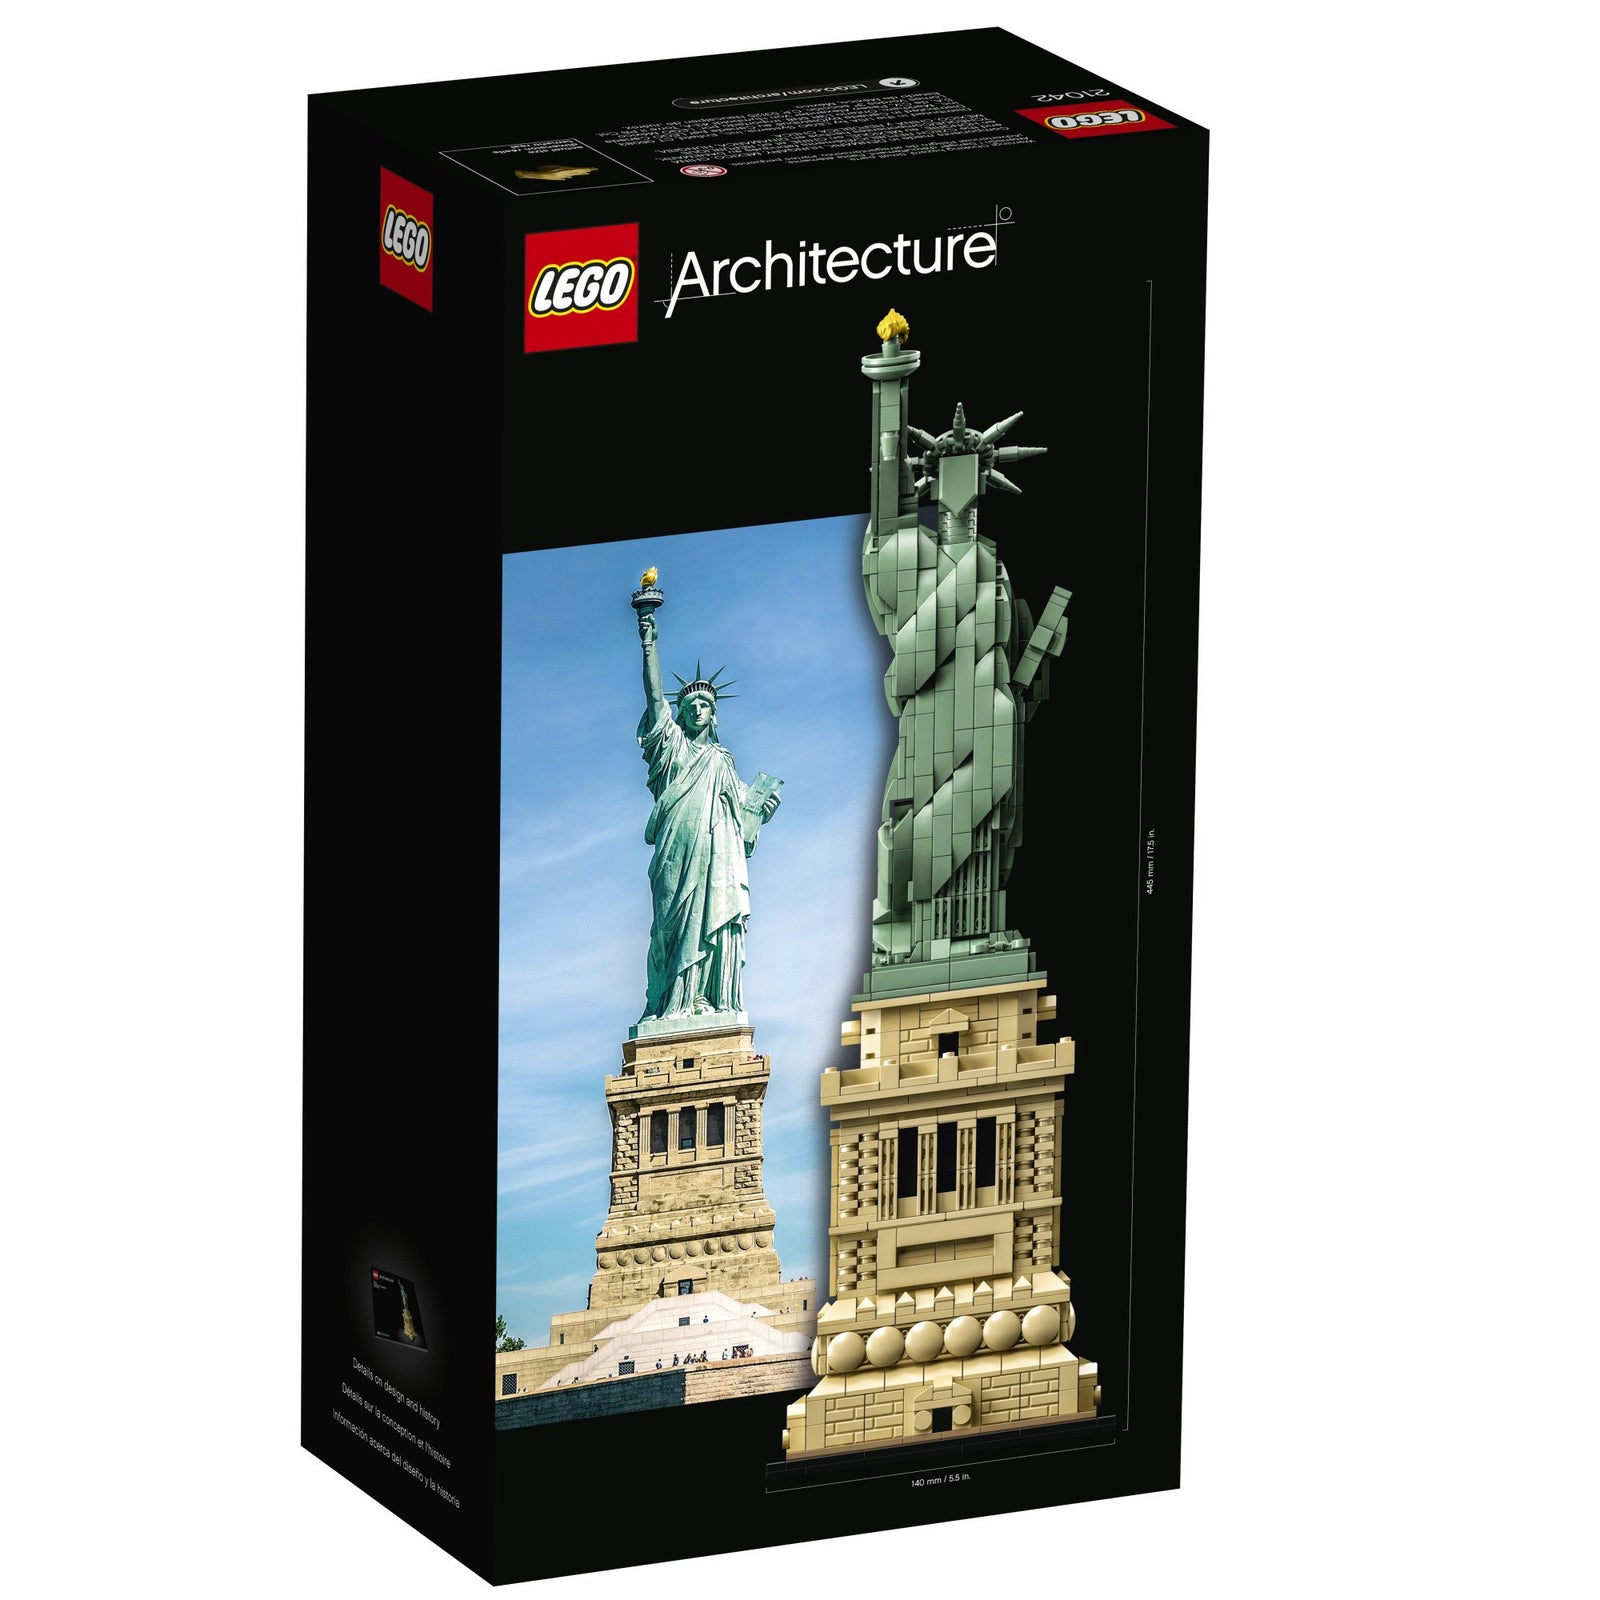 LEGO Architecture Statue of Liberty 21042 Building Kit (1685 Pieces)